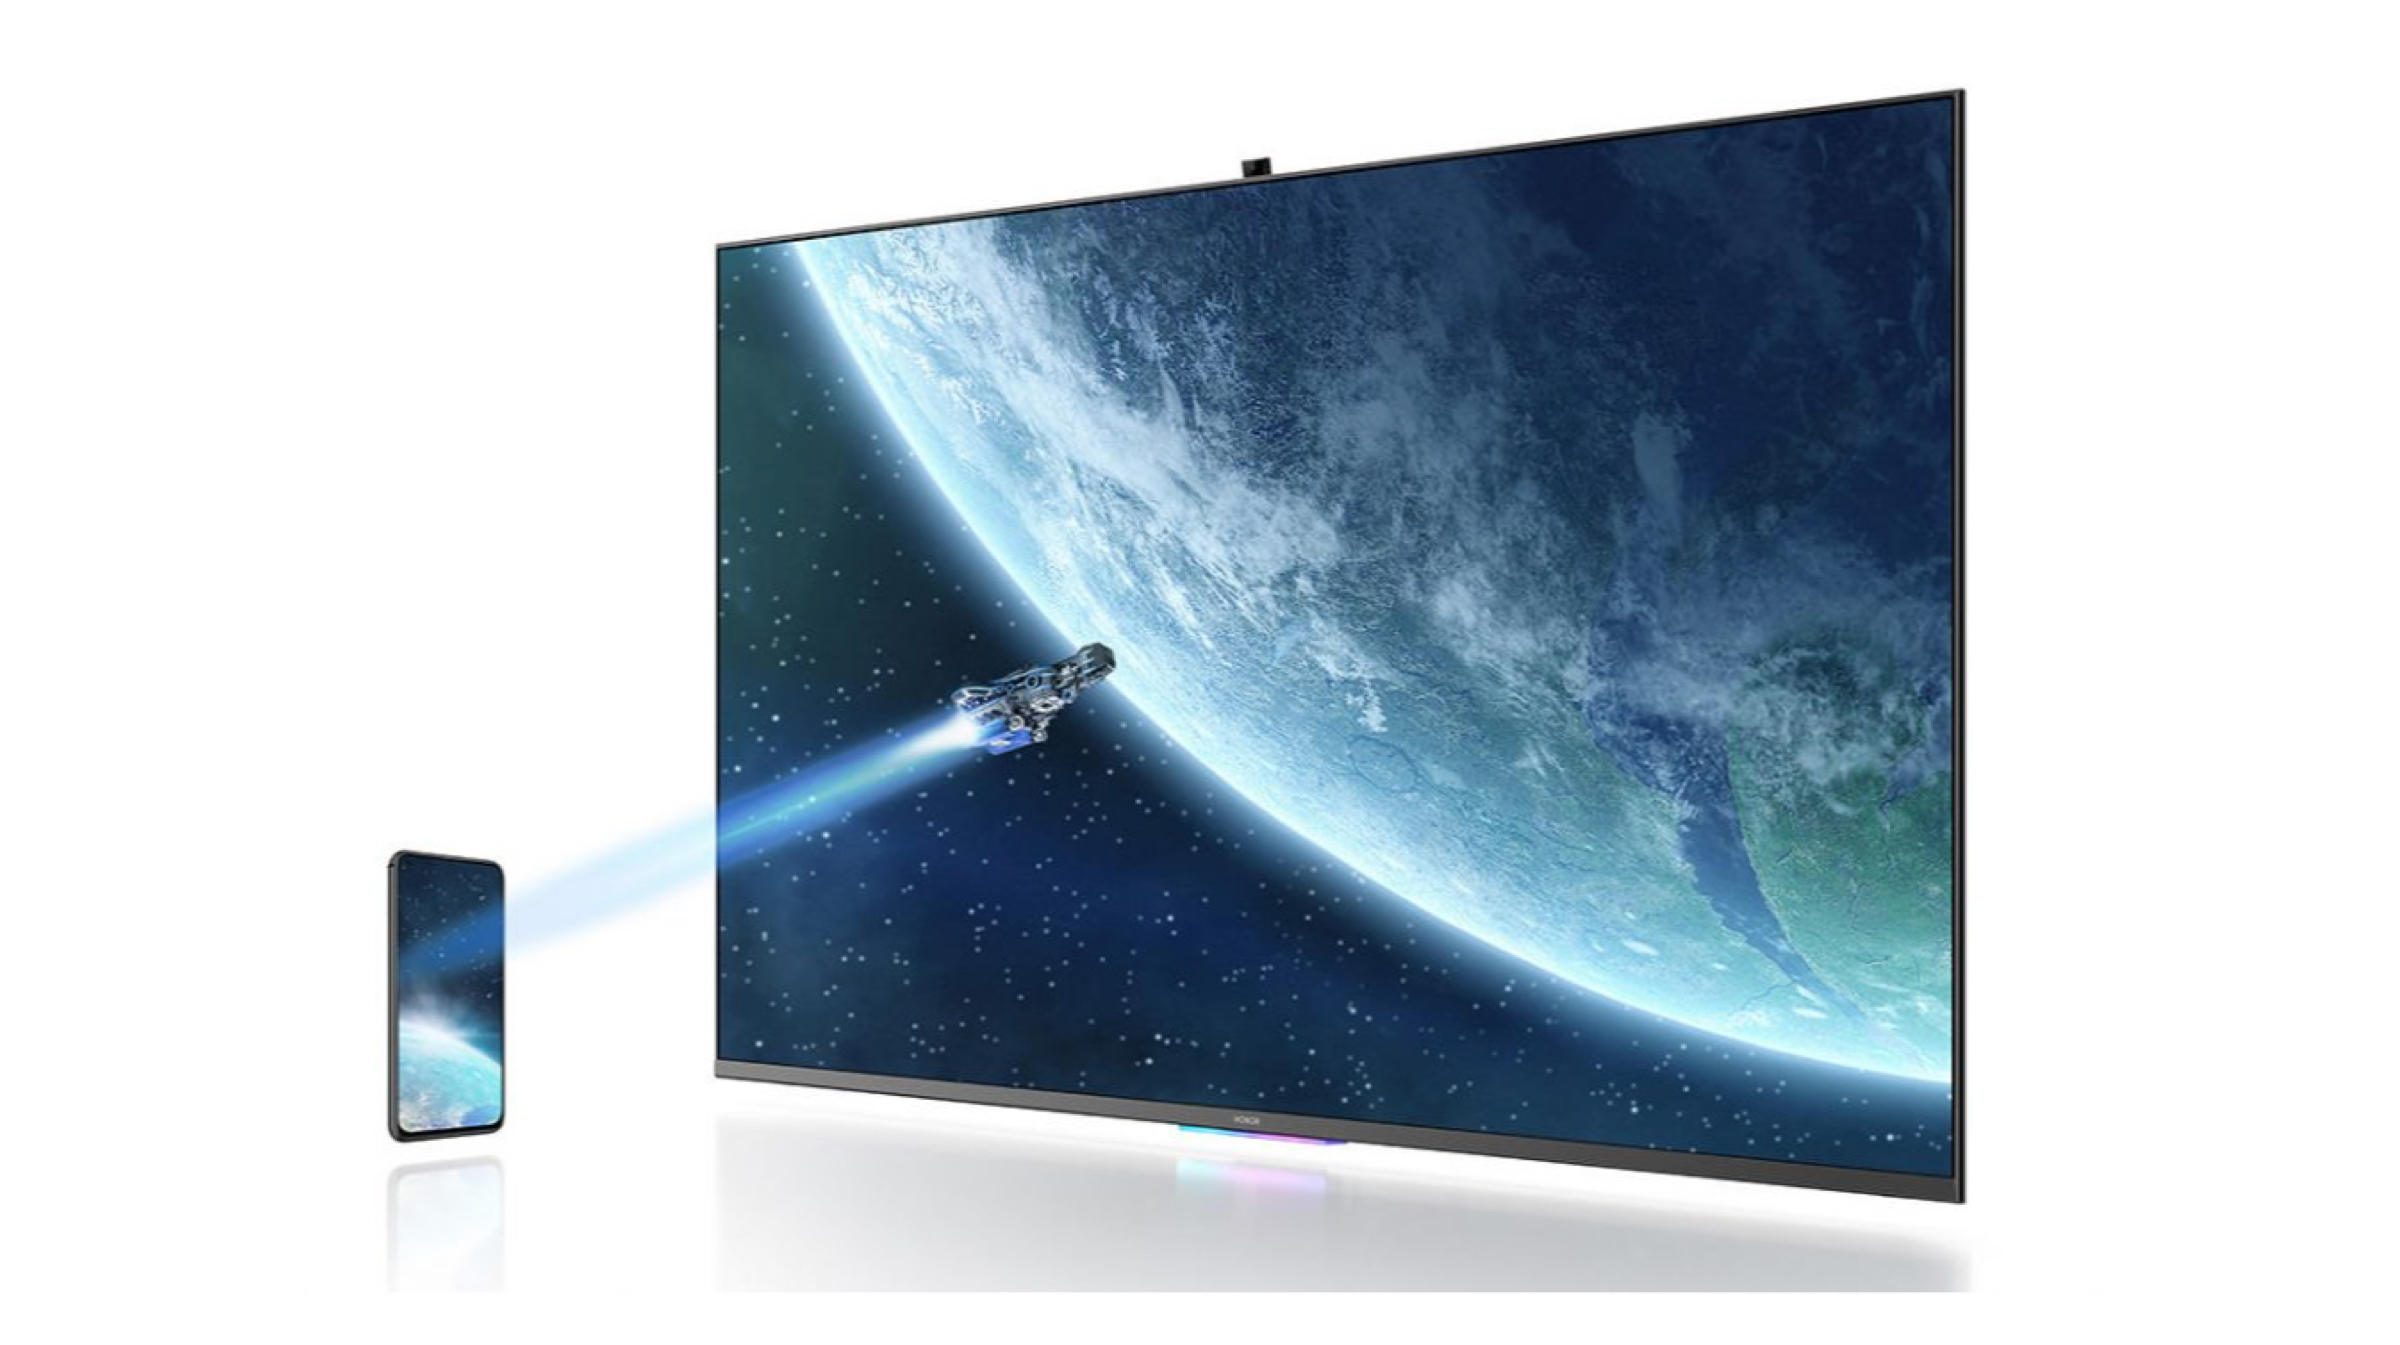 The Honor Vision TV is the first device to run Huawei’s HarmonyOS